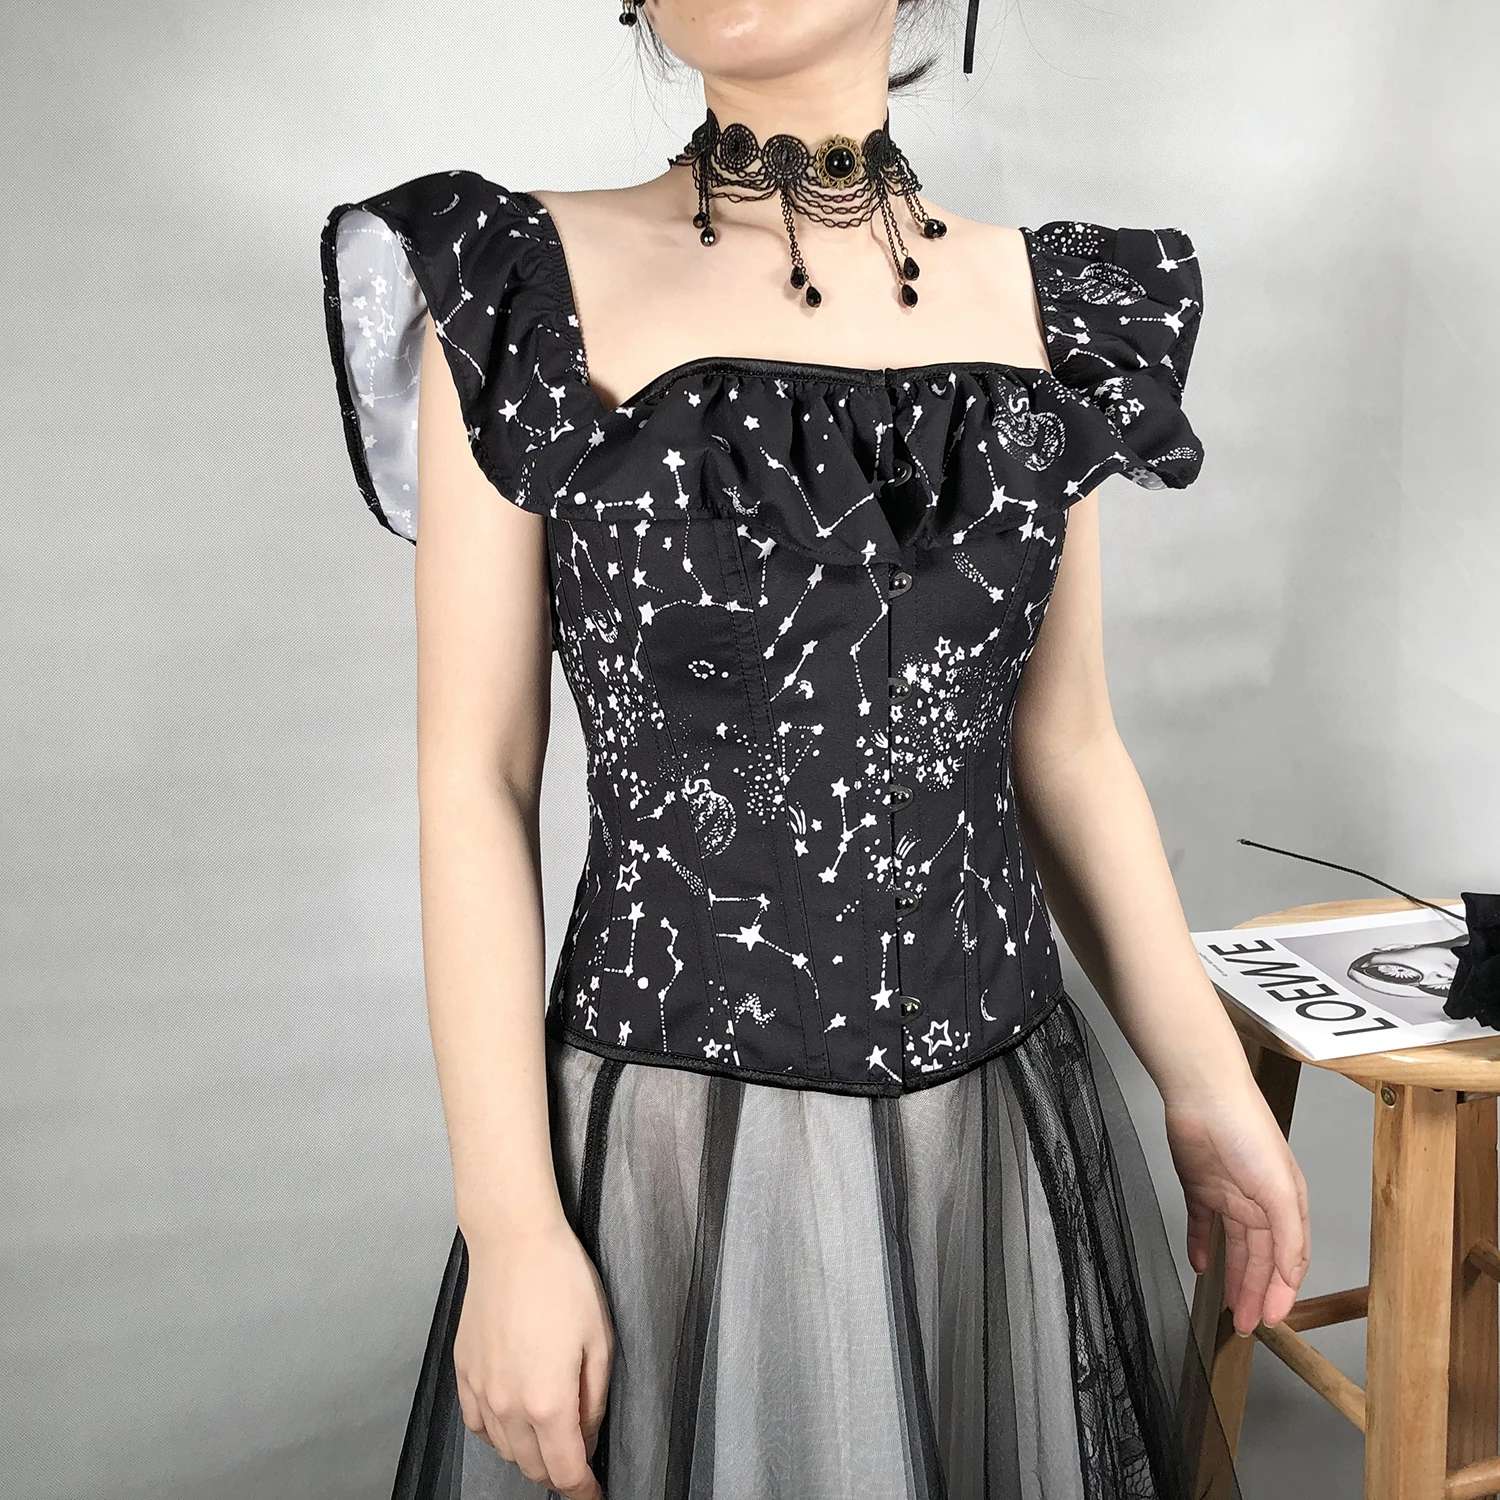 

New Starry Sky Black Sexy Bridal Wedding Dress Gathered Waist Corset Women Sexy Gothic Busiter Tops Body Shaper Slimming Clothes